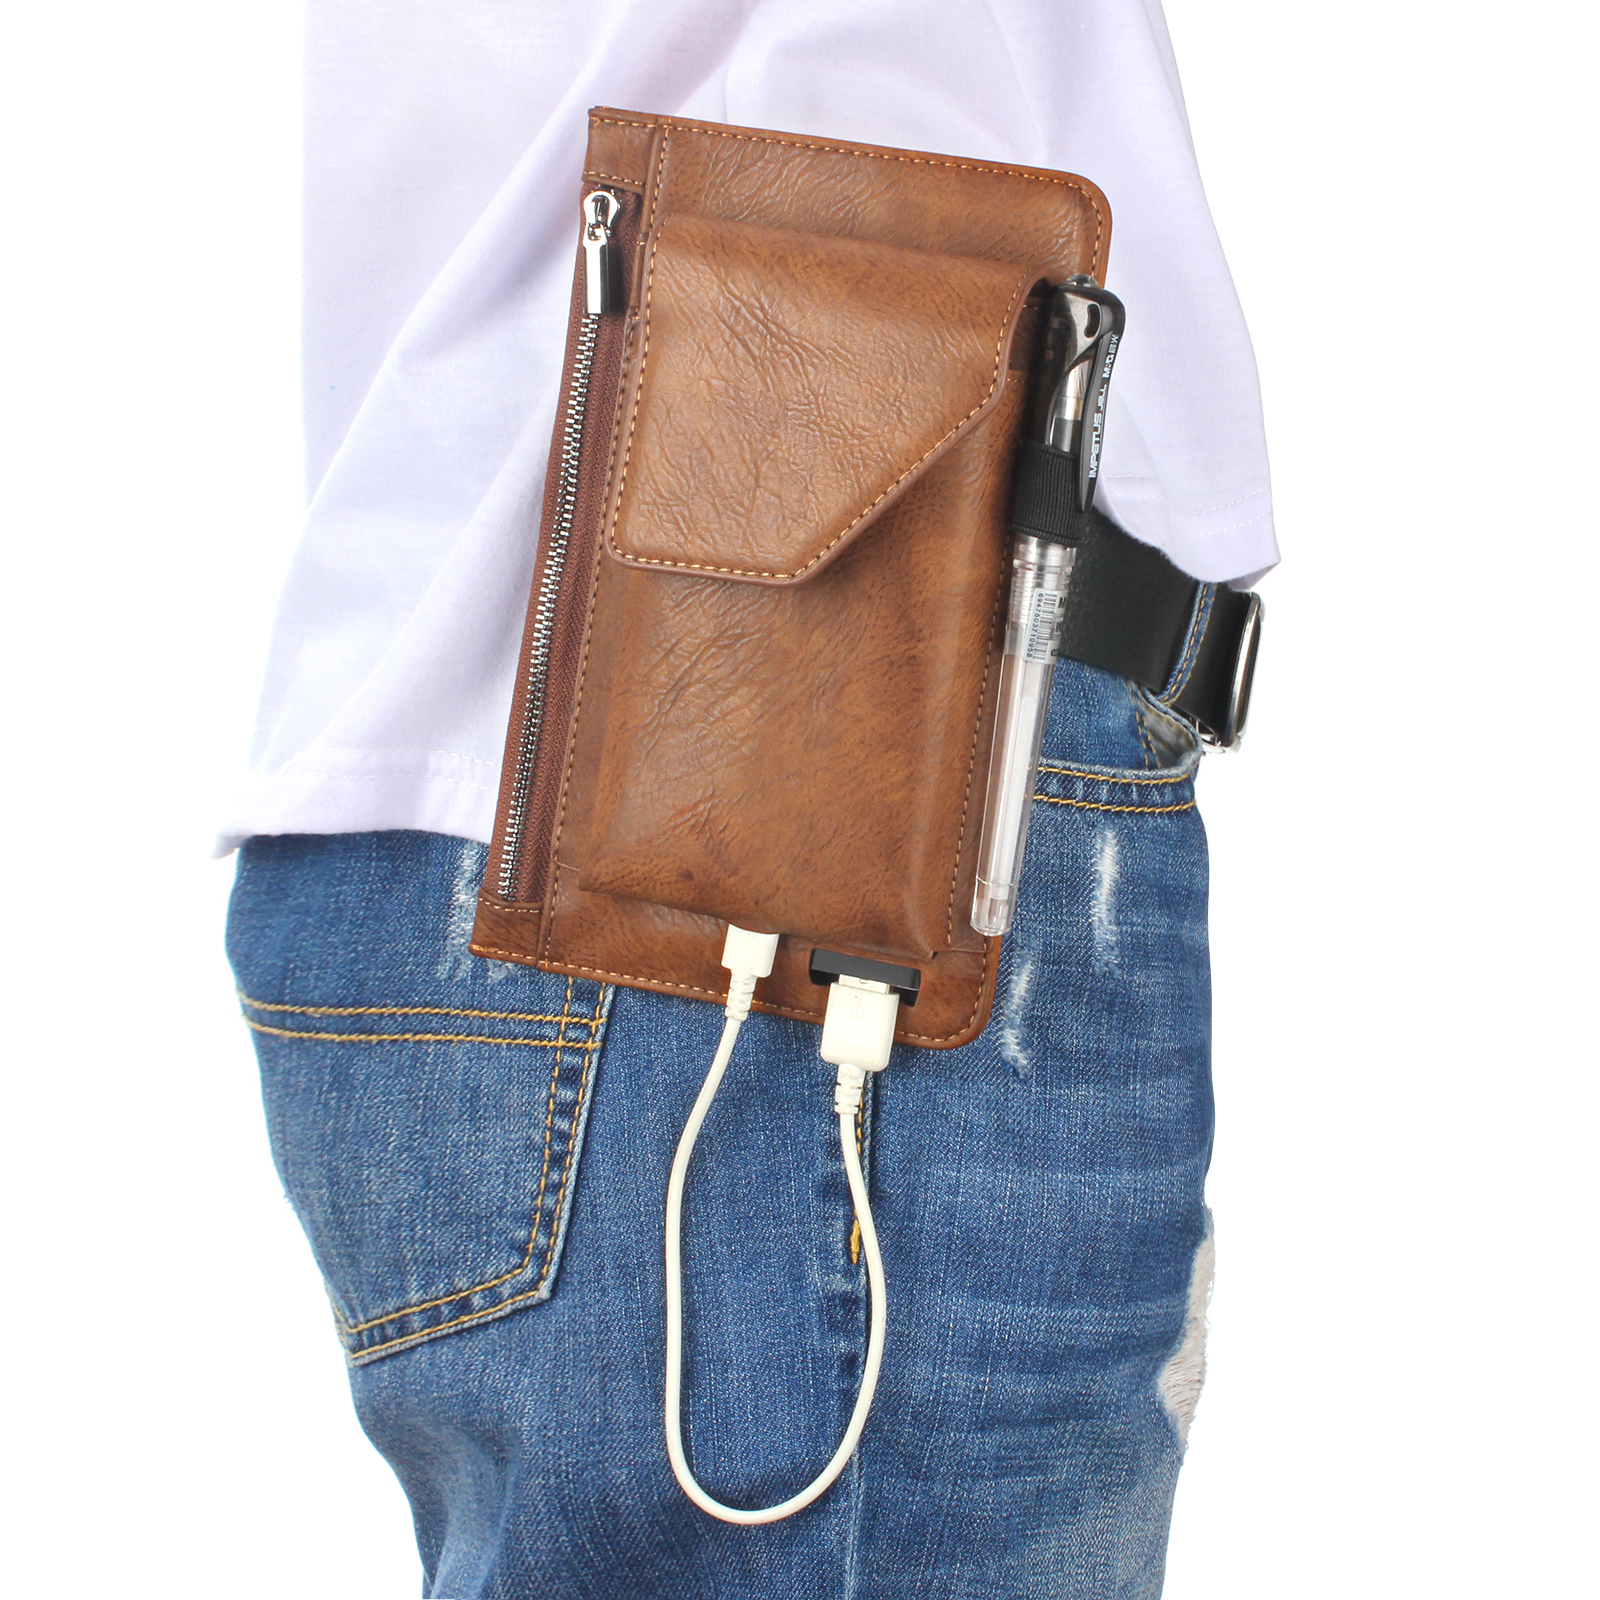 Bakeey-Casual-Vintage-Bussiness-Multi-Pocket-Reserve-Charging-Port-PU-Leather-Mobile-Phone-Money-Hik-1692248-8